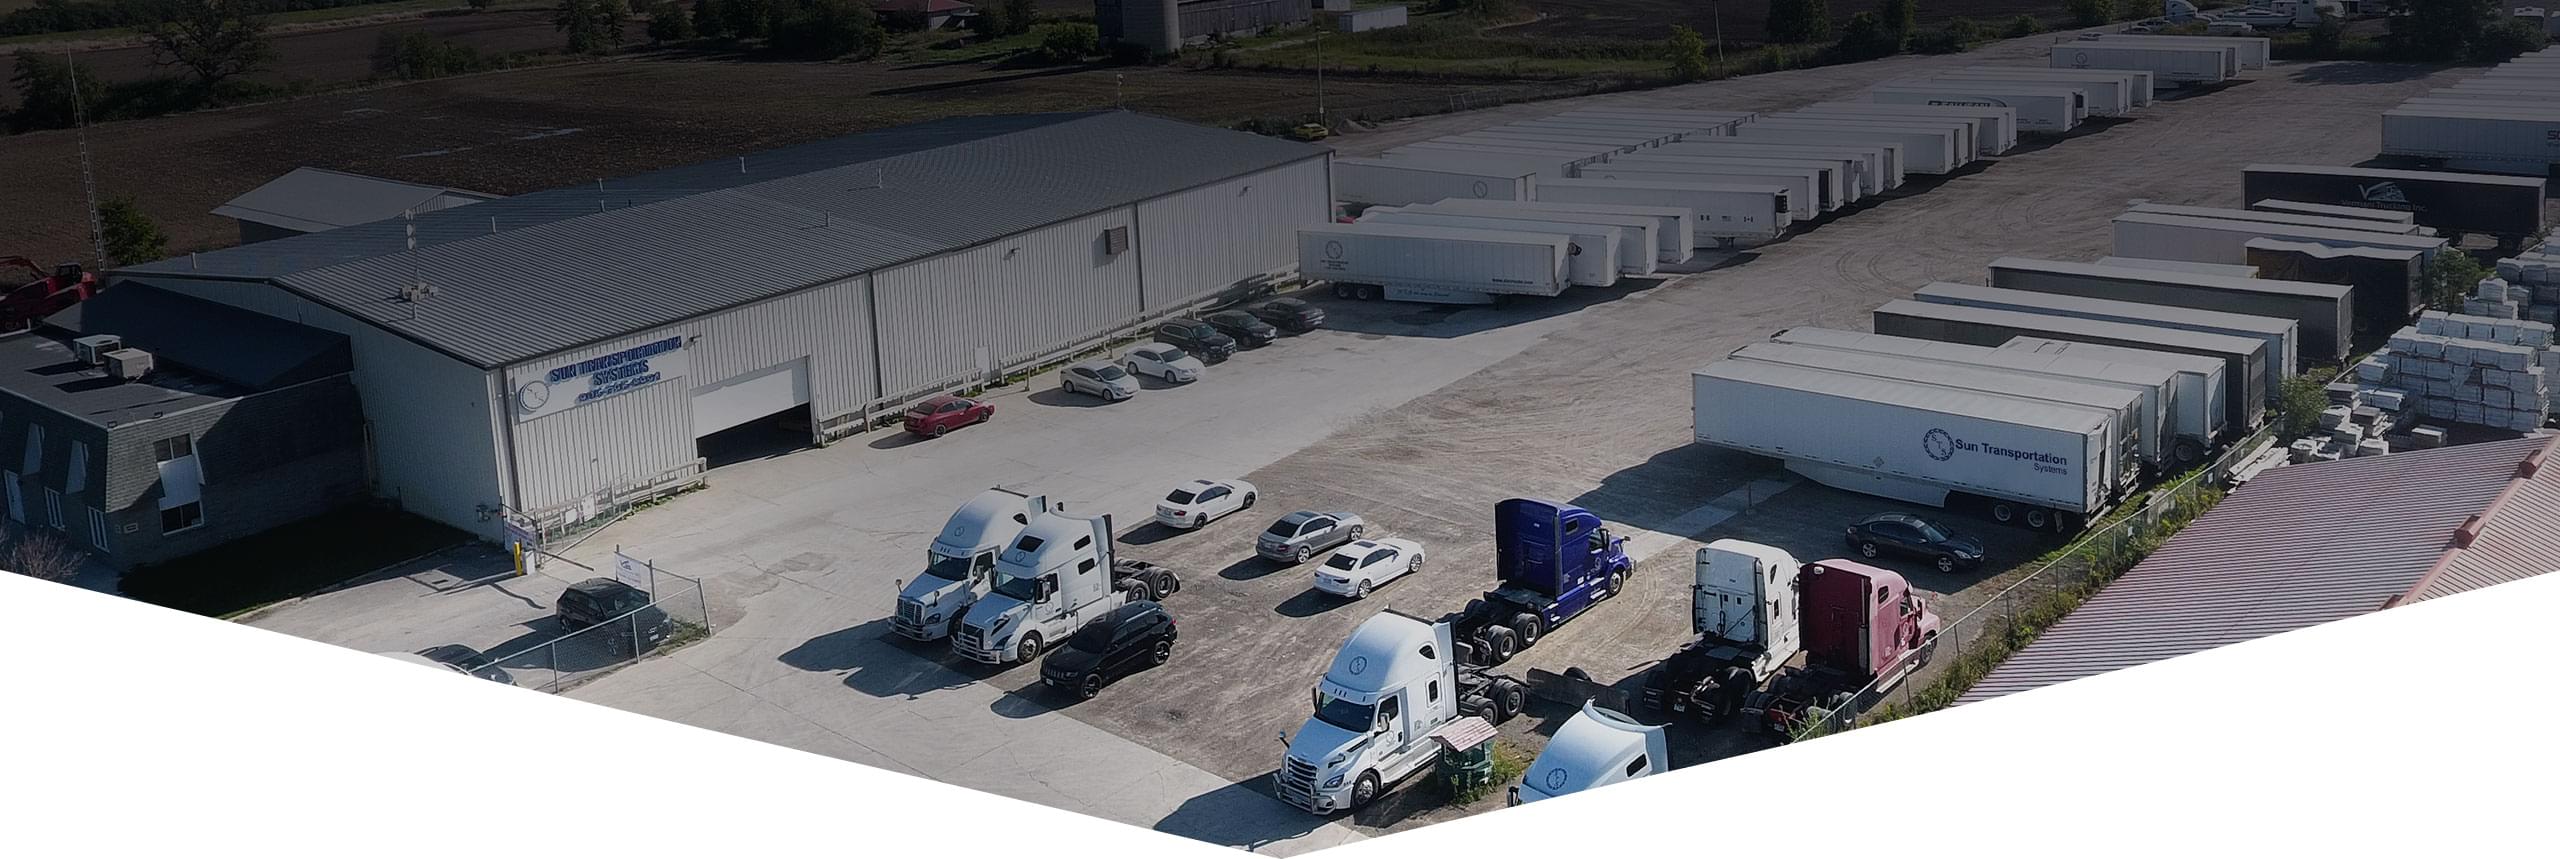 An aerial view of STS property, with building, vehicles, trucks, trailers and equipment available to lease.